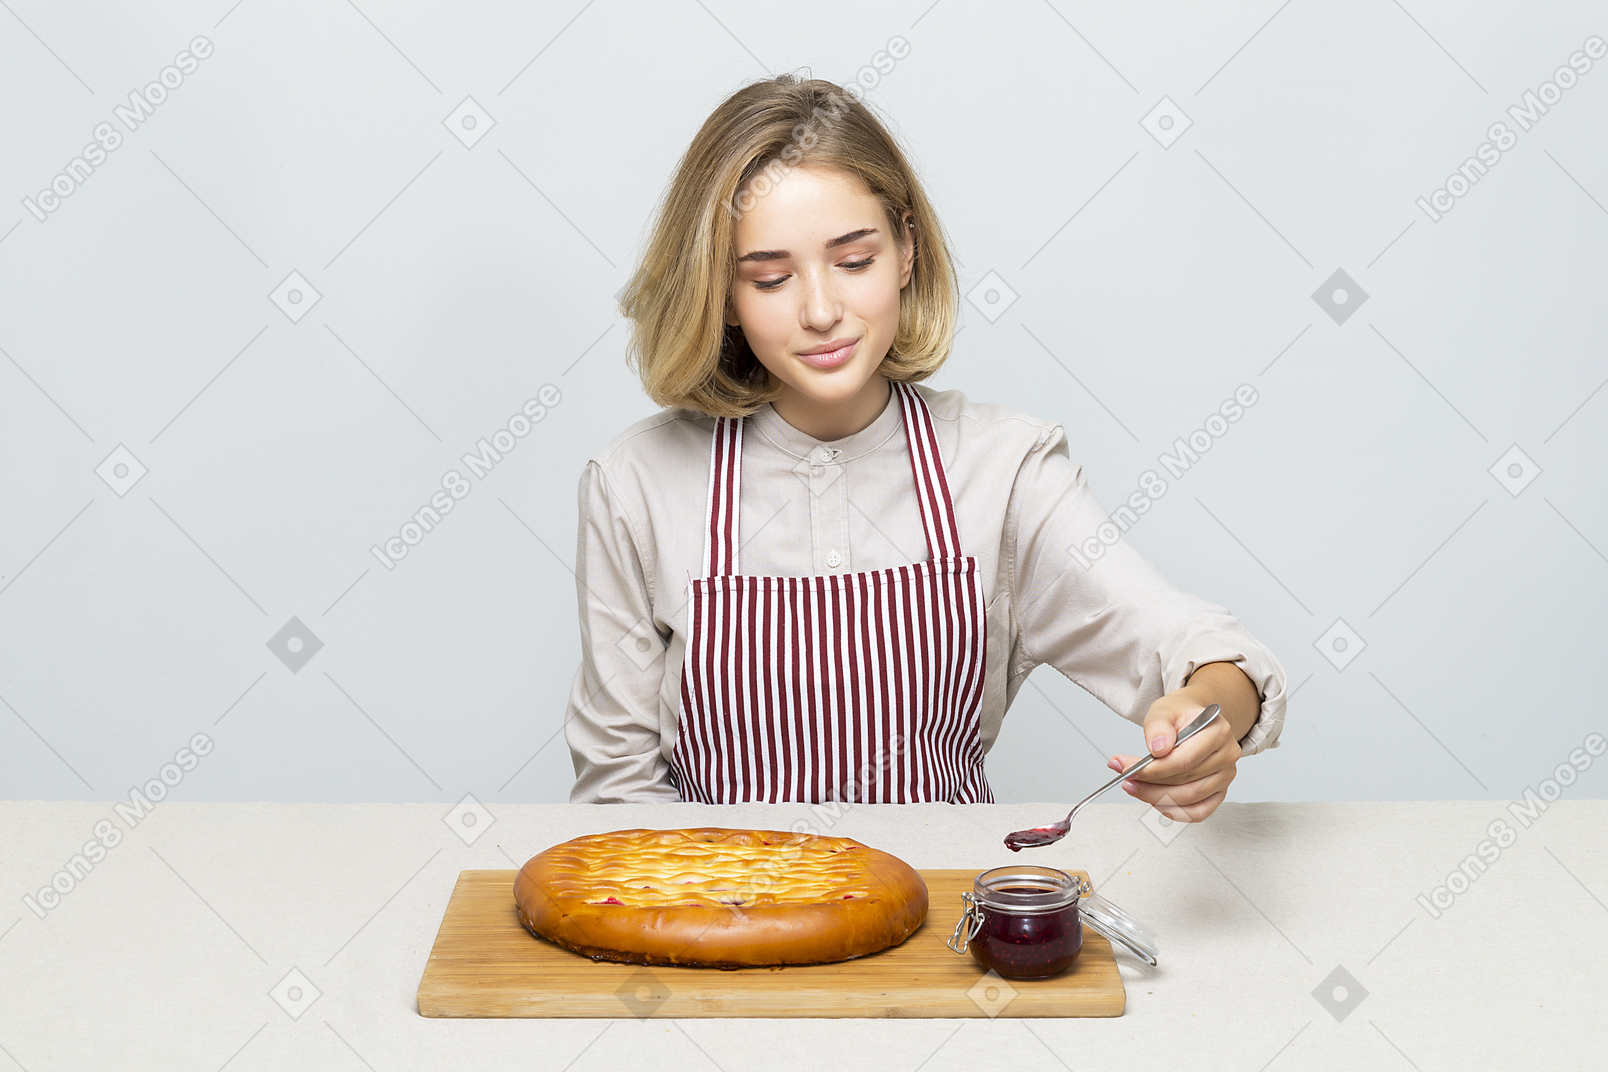 Girl sitting at the table and taking jam with a spoon